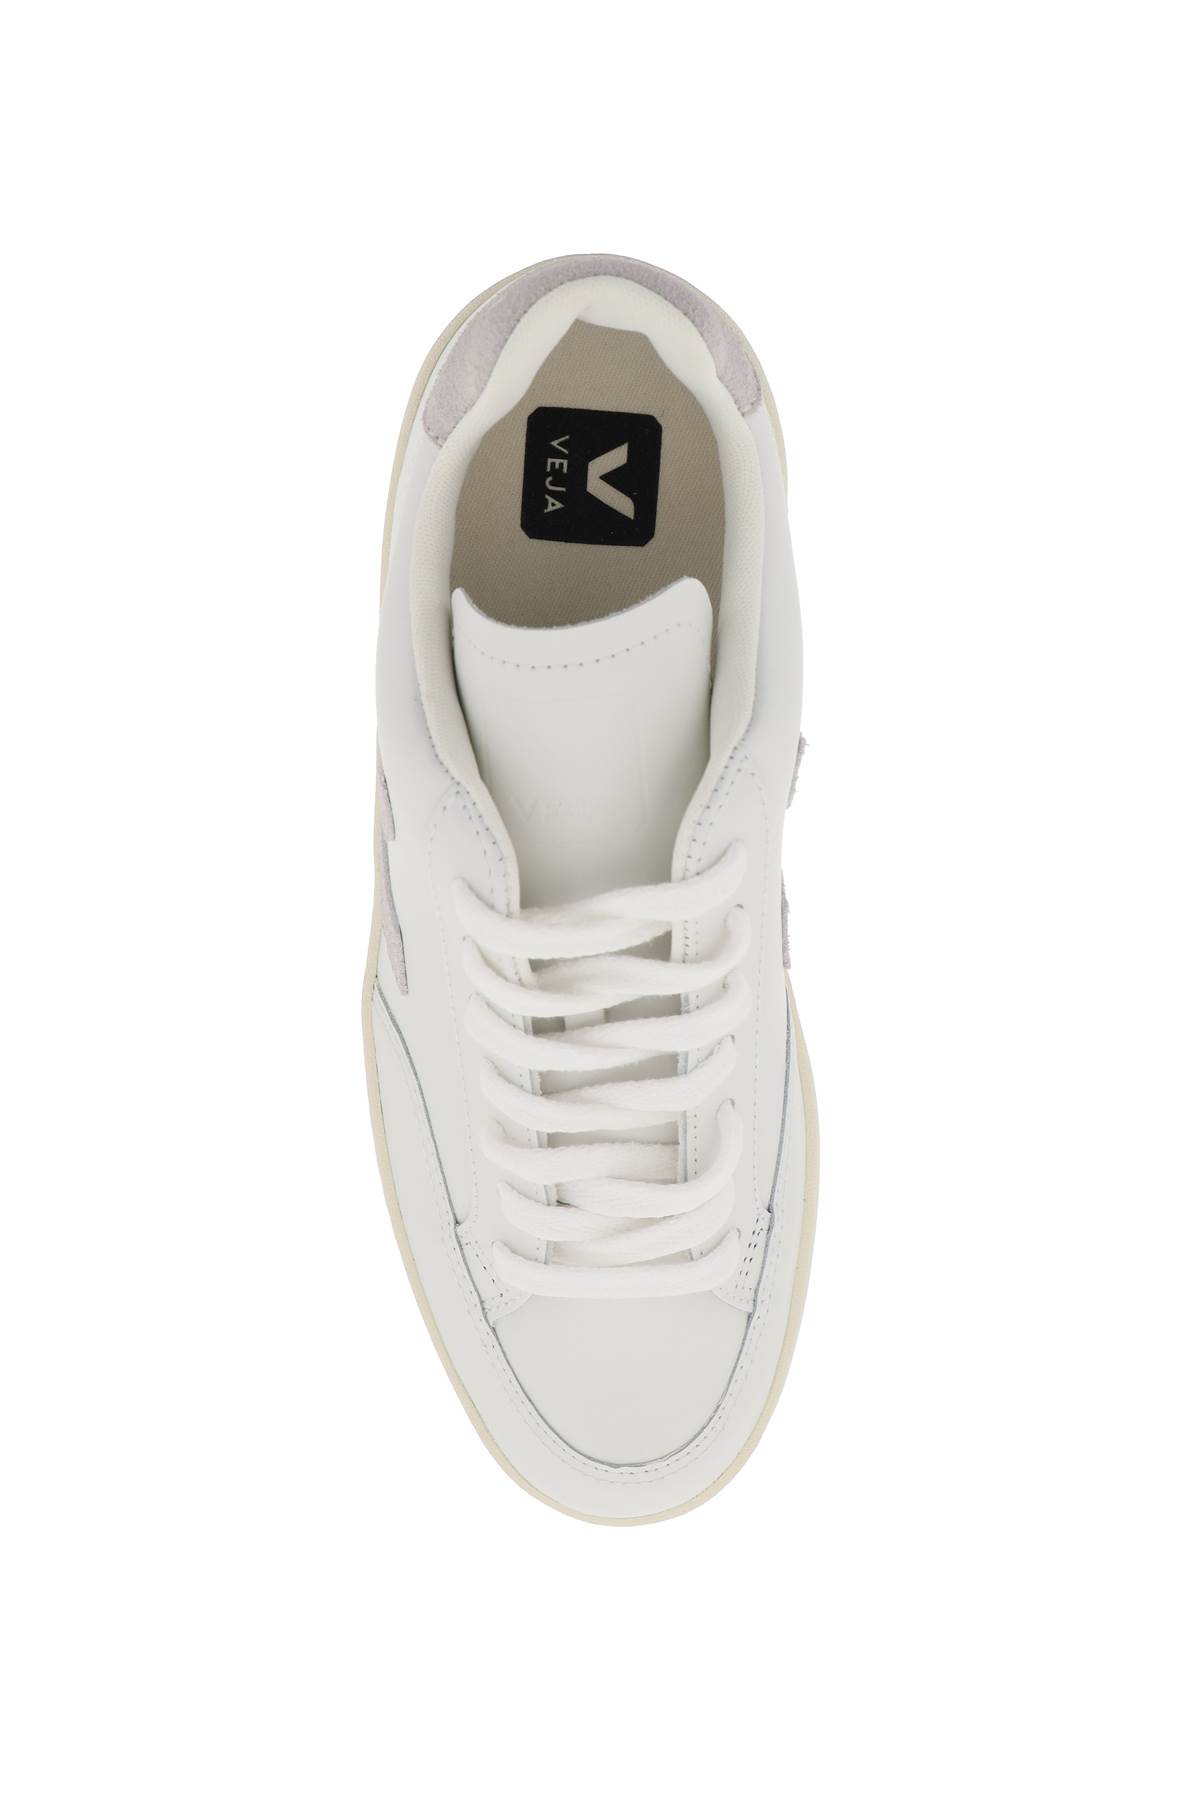 Shop Veja Leather V-12 Sneakers In Extra White Light Grey (white)